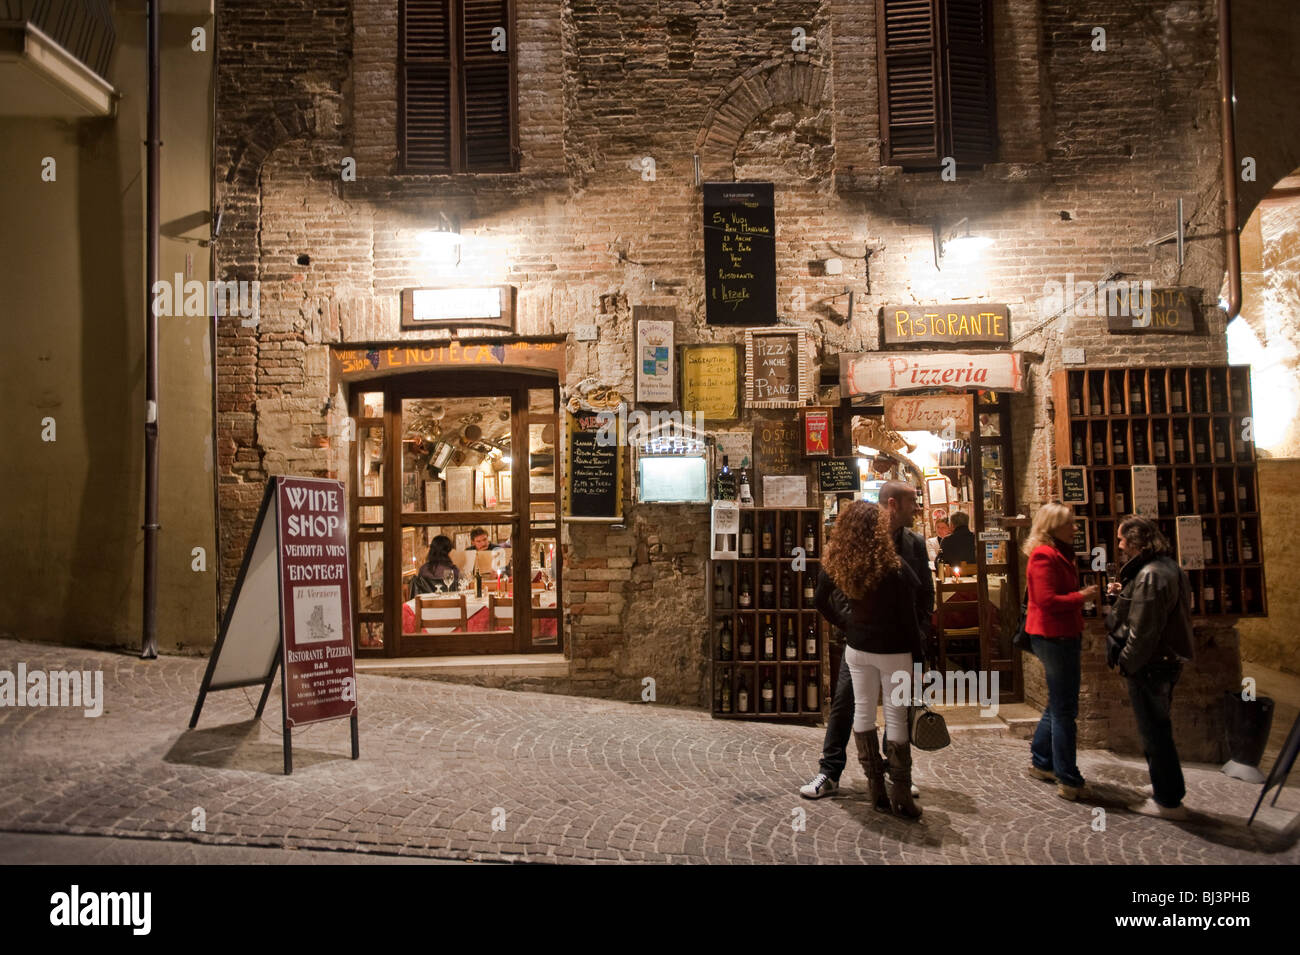 Wine shop and restaurant at night, Montefalco, Umbria, Italy, Europe Stock Photo